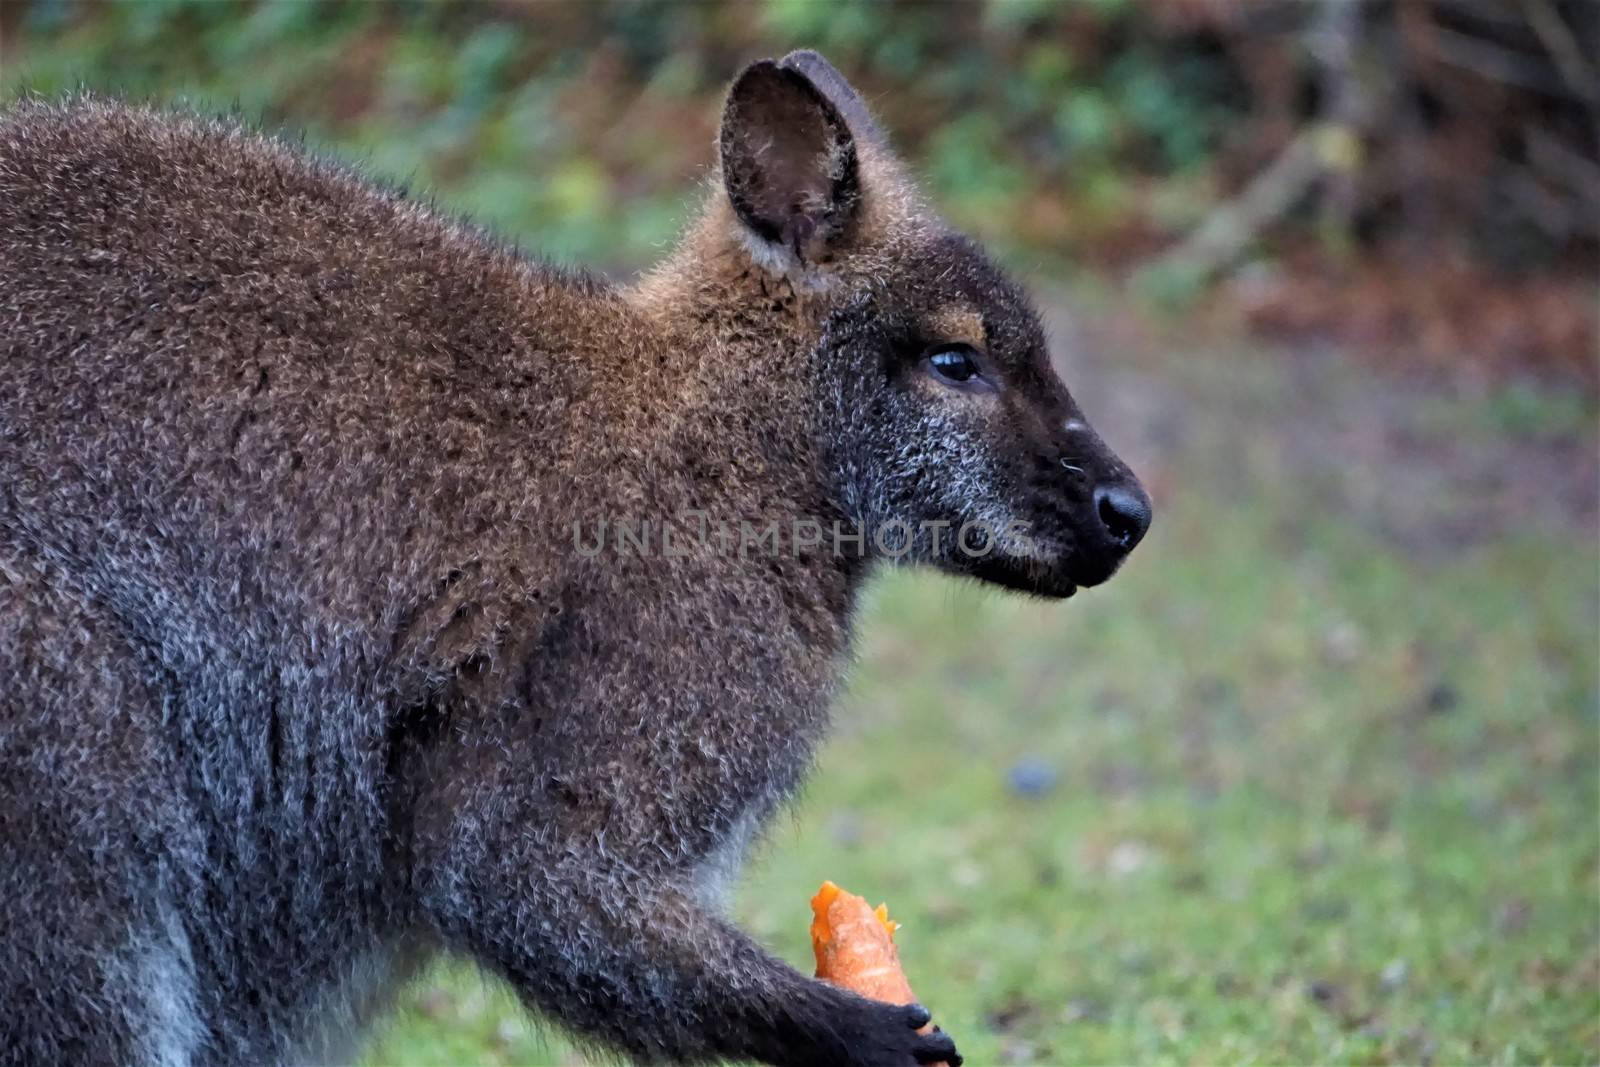 Cute red-necked wallaby eating a carrot in the zoo